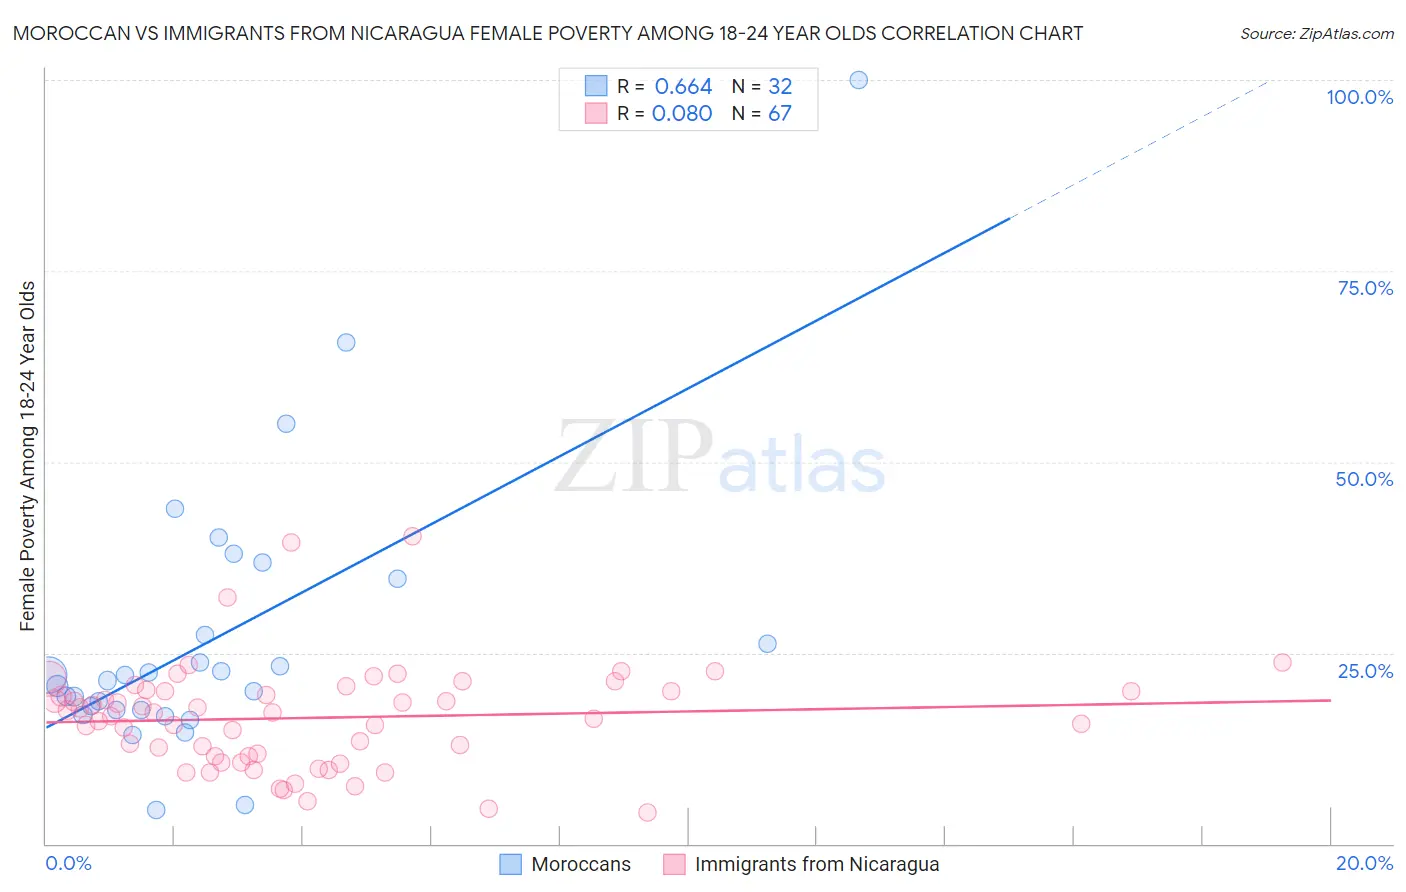 Moroccan vs Immigrants from Nicaragua Female Poverty Among 18-24 Year Olds